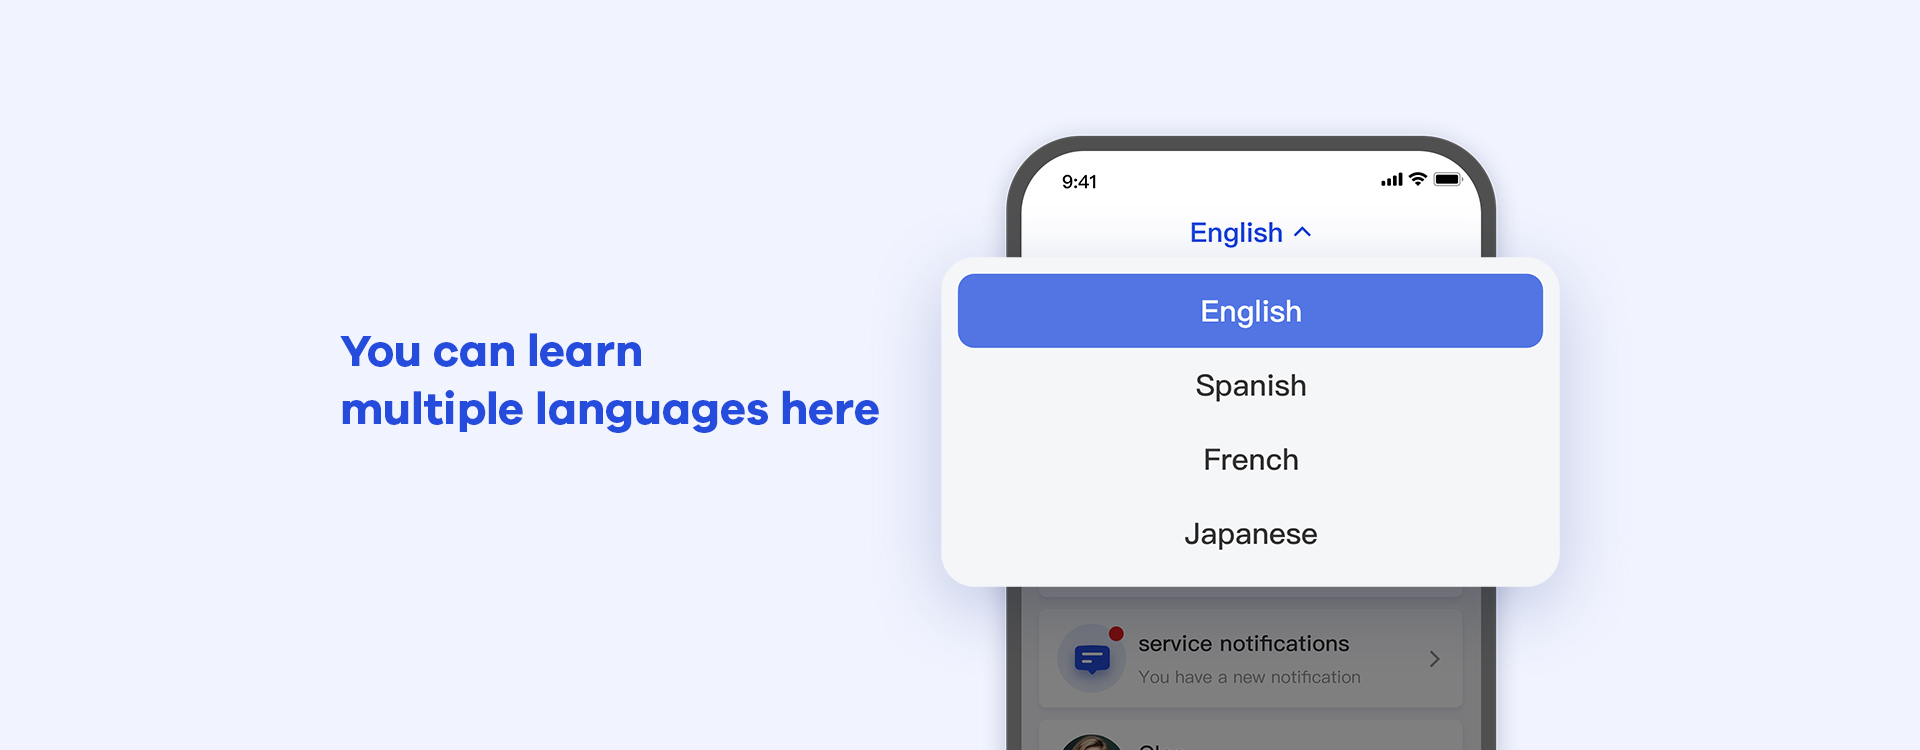 You can learn multiple languages here